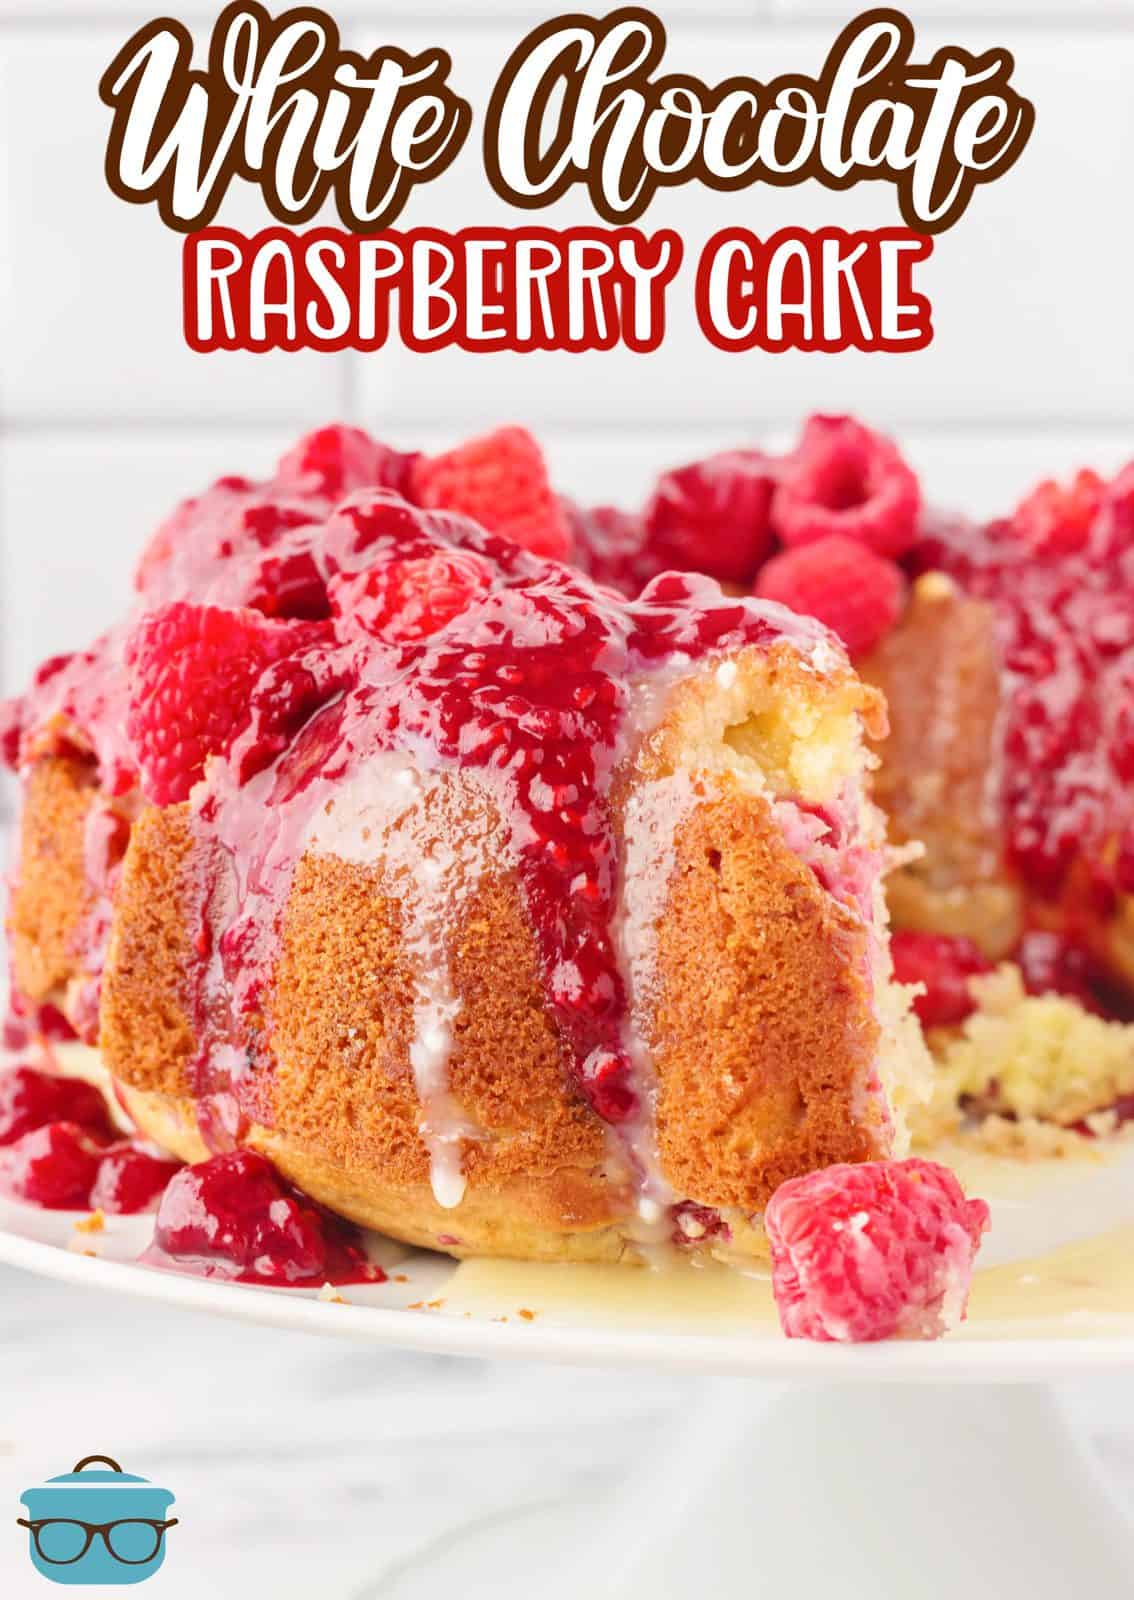 Pinterest image of White Chocolate Raspberry Cake with slies missing on platter.